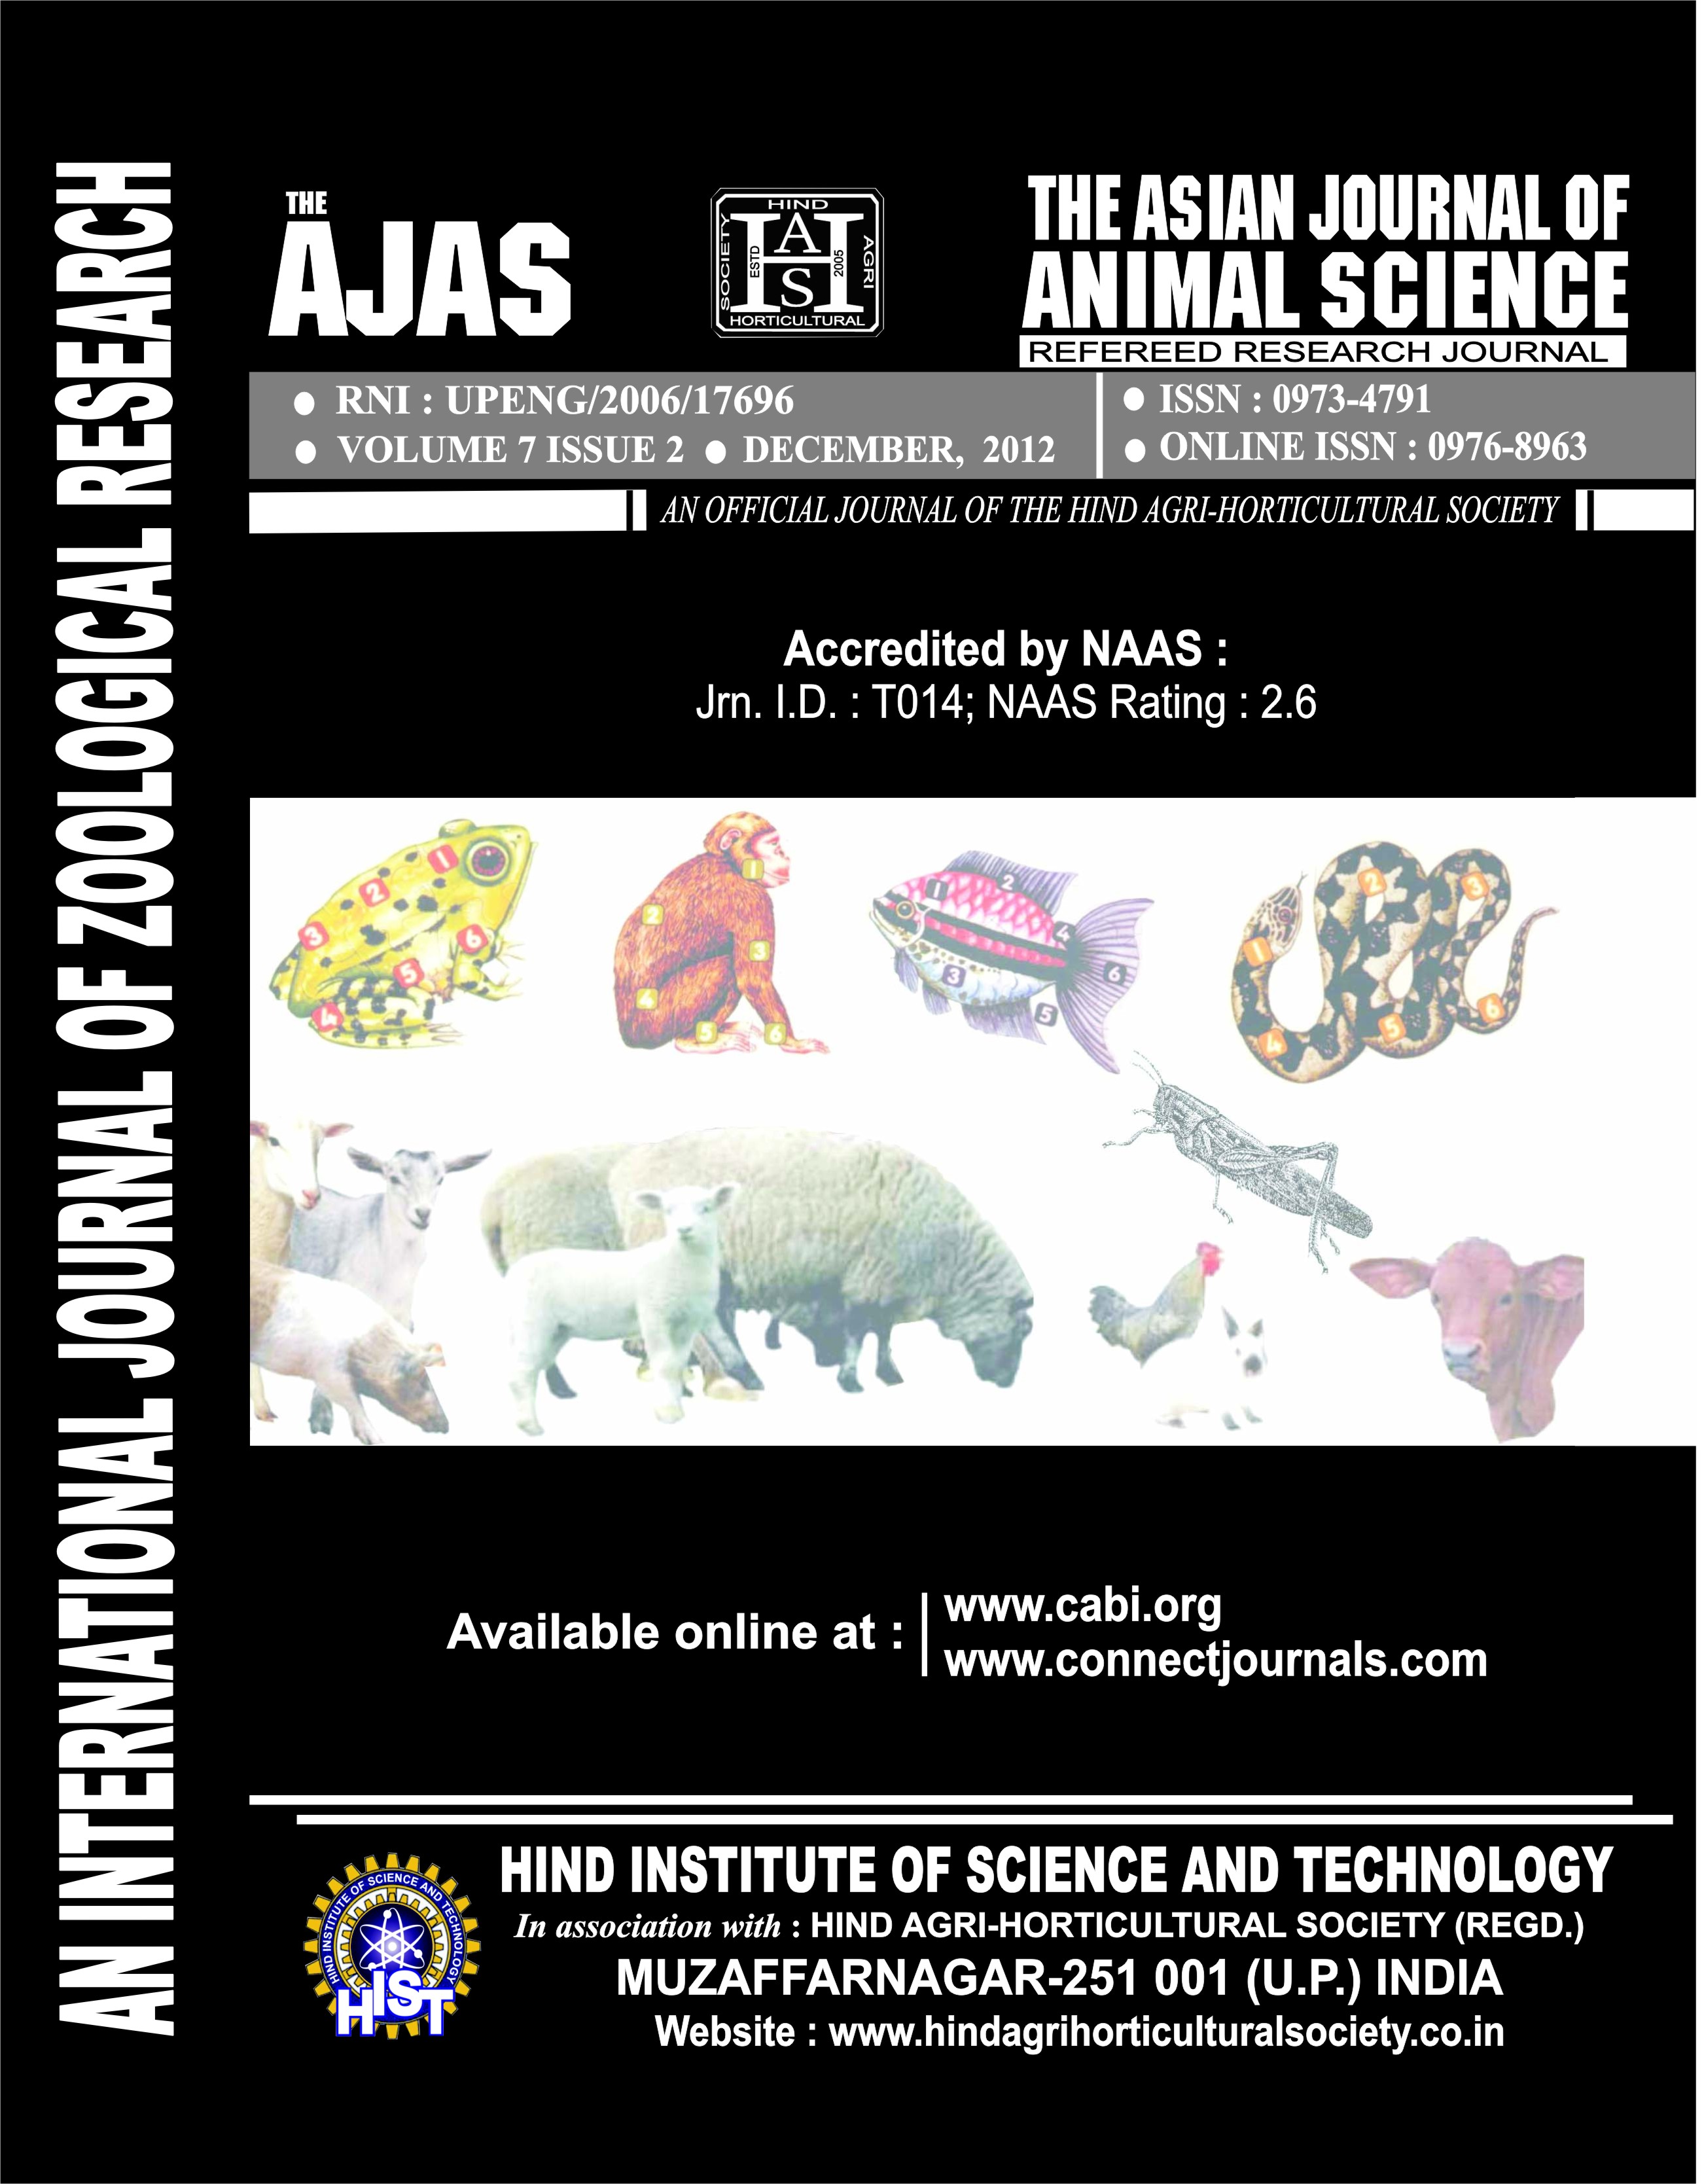 The Asian Journal of Animal Science Research  Paper|Indexing|Impact factor